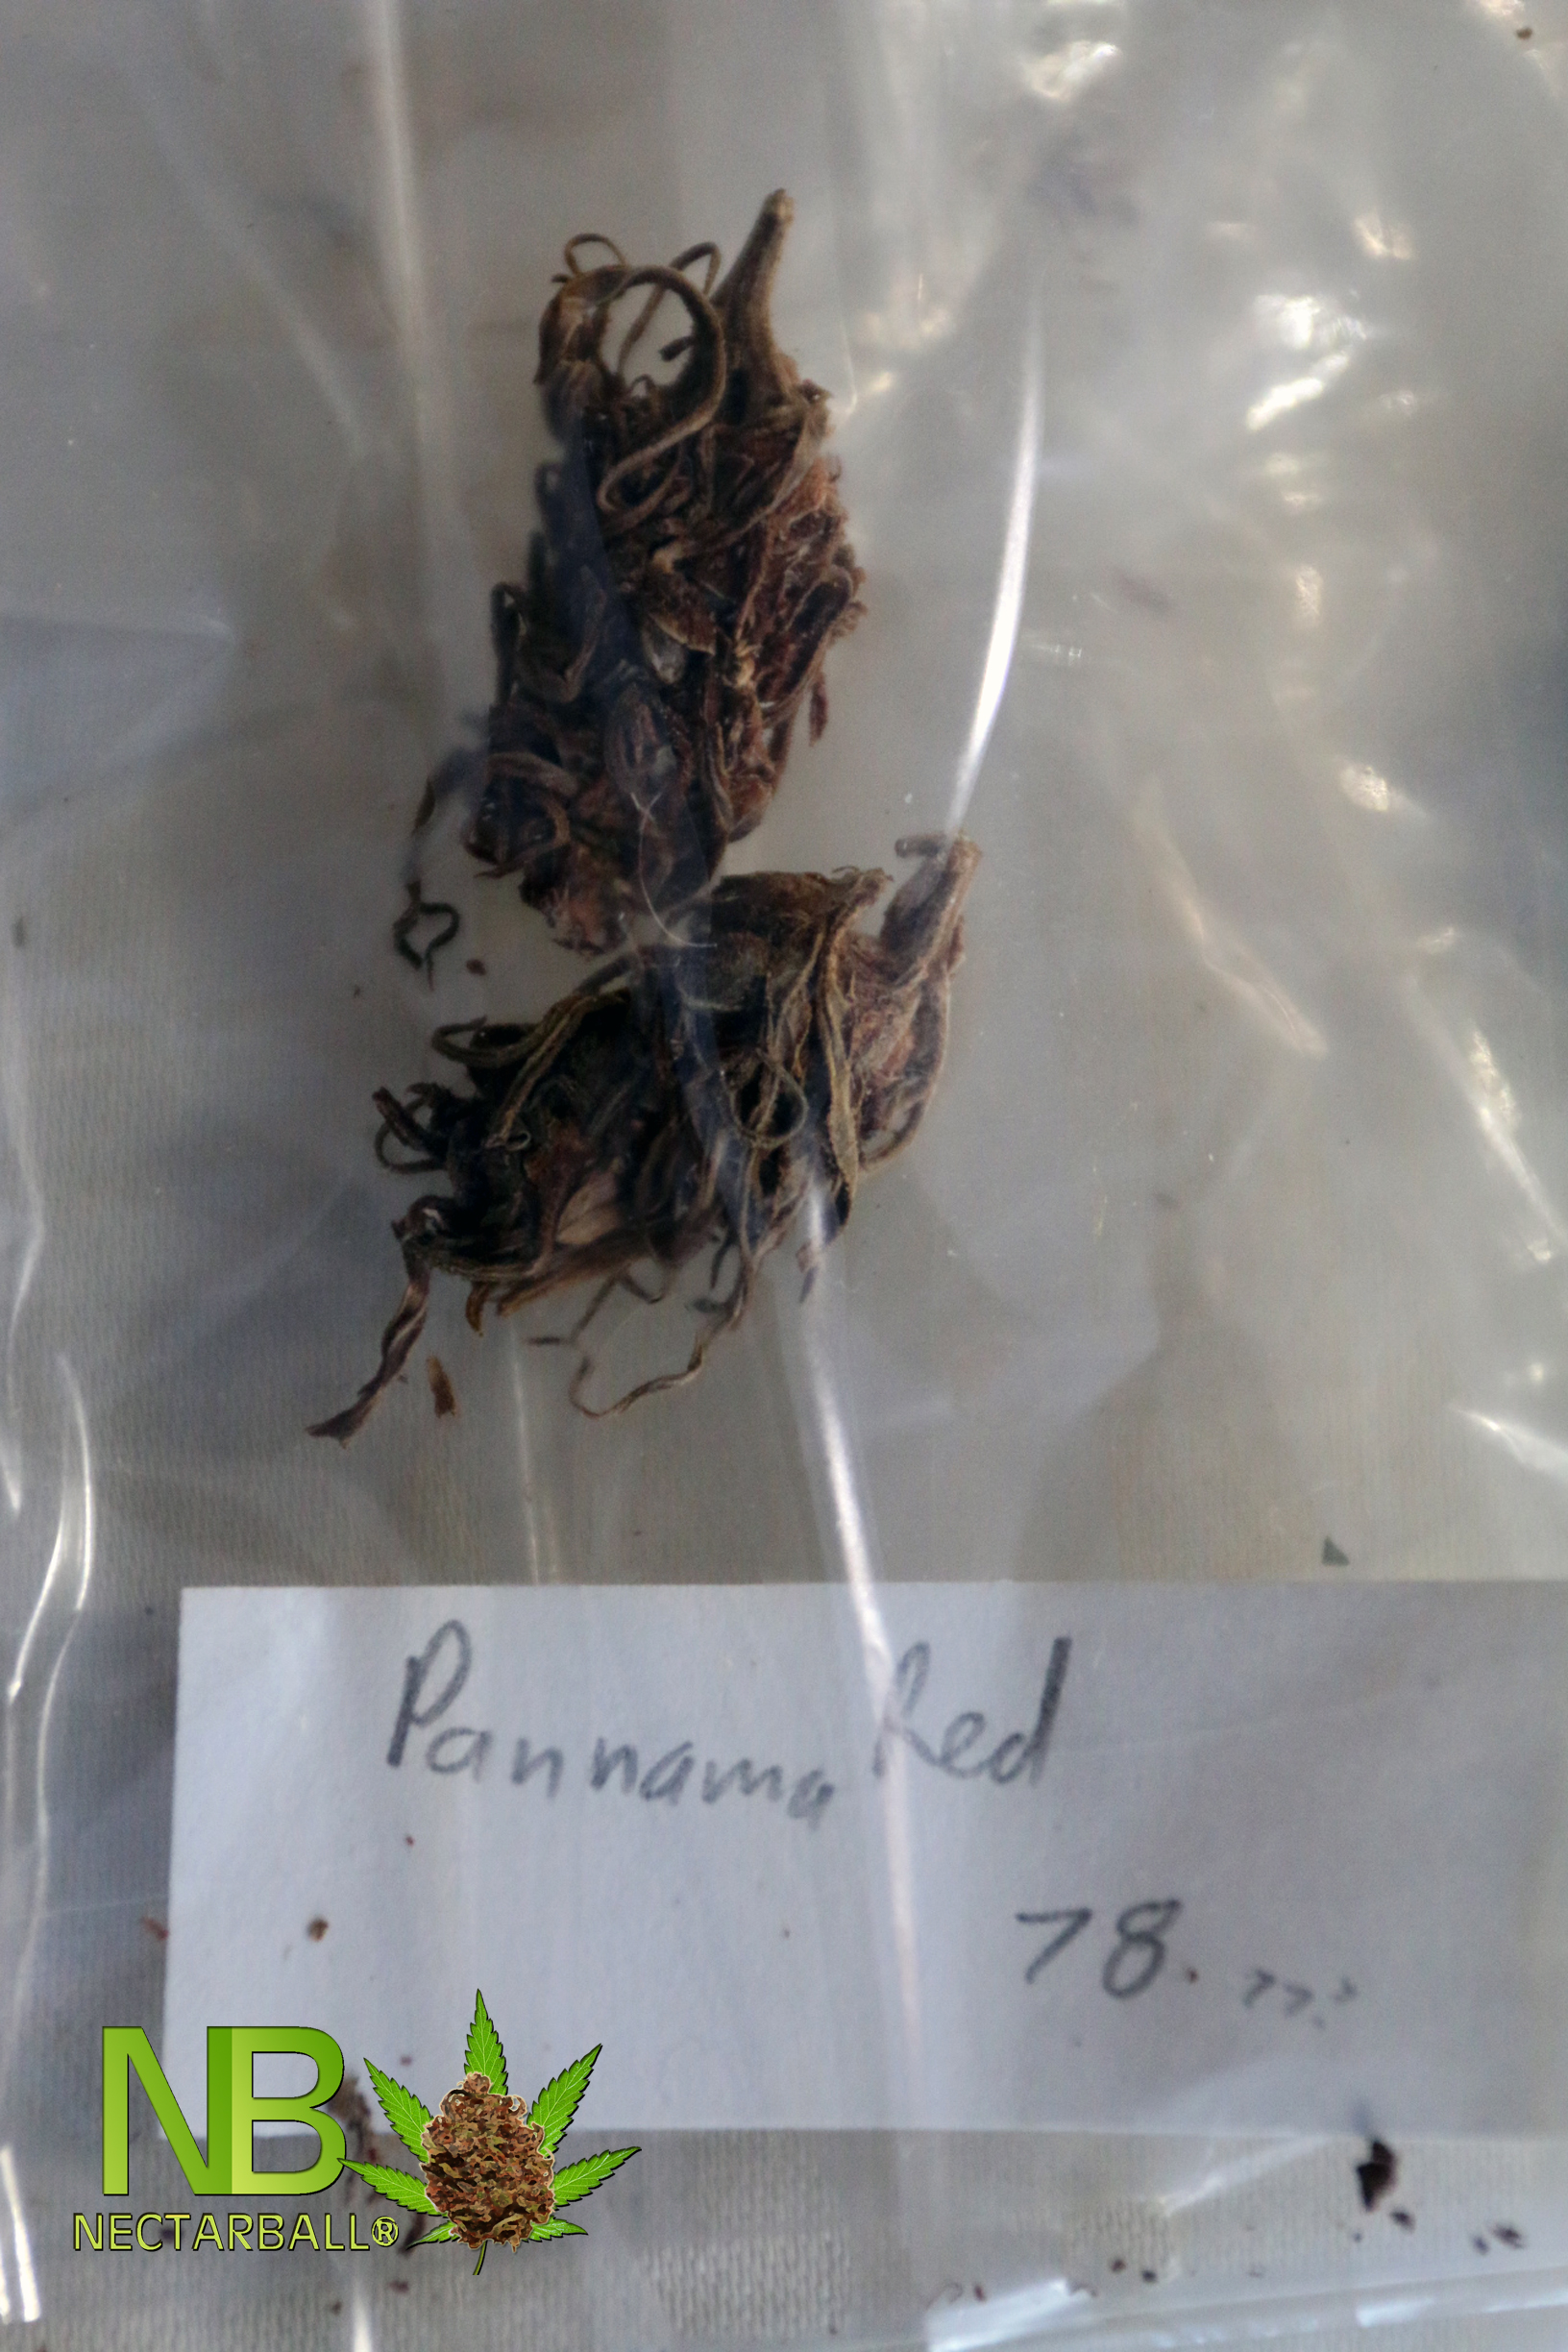 Growing conditions for germinating extraordinary Panama Red 